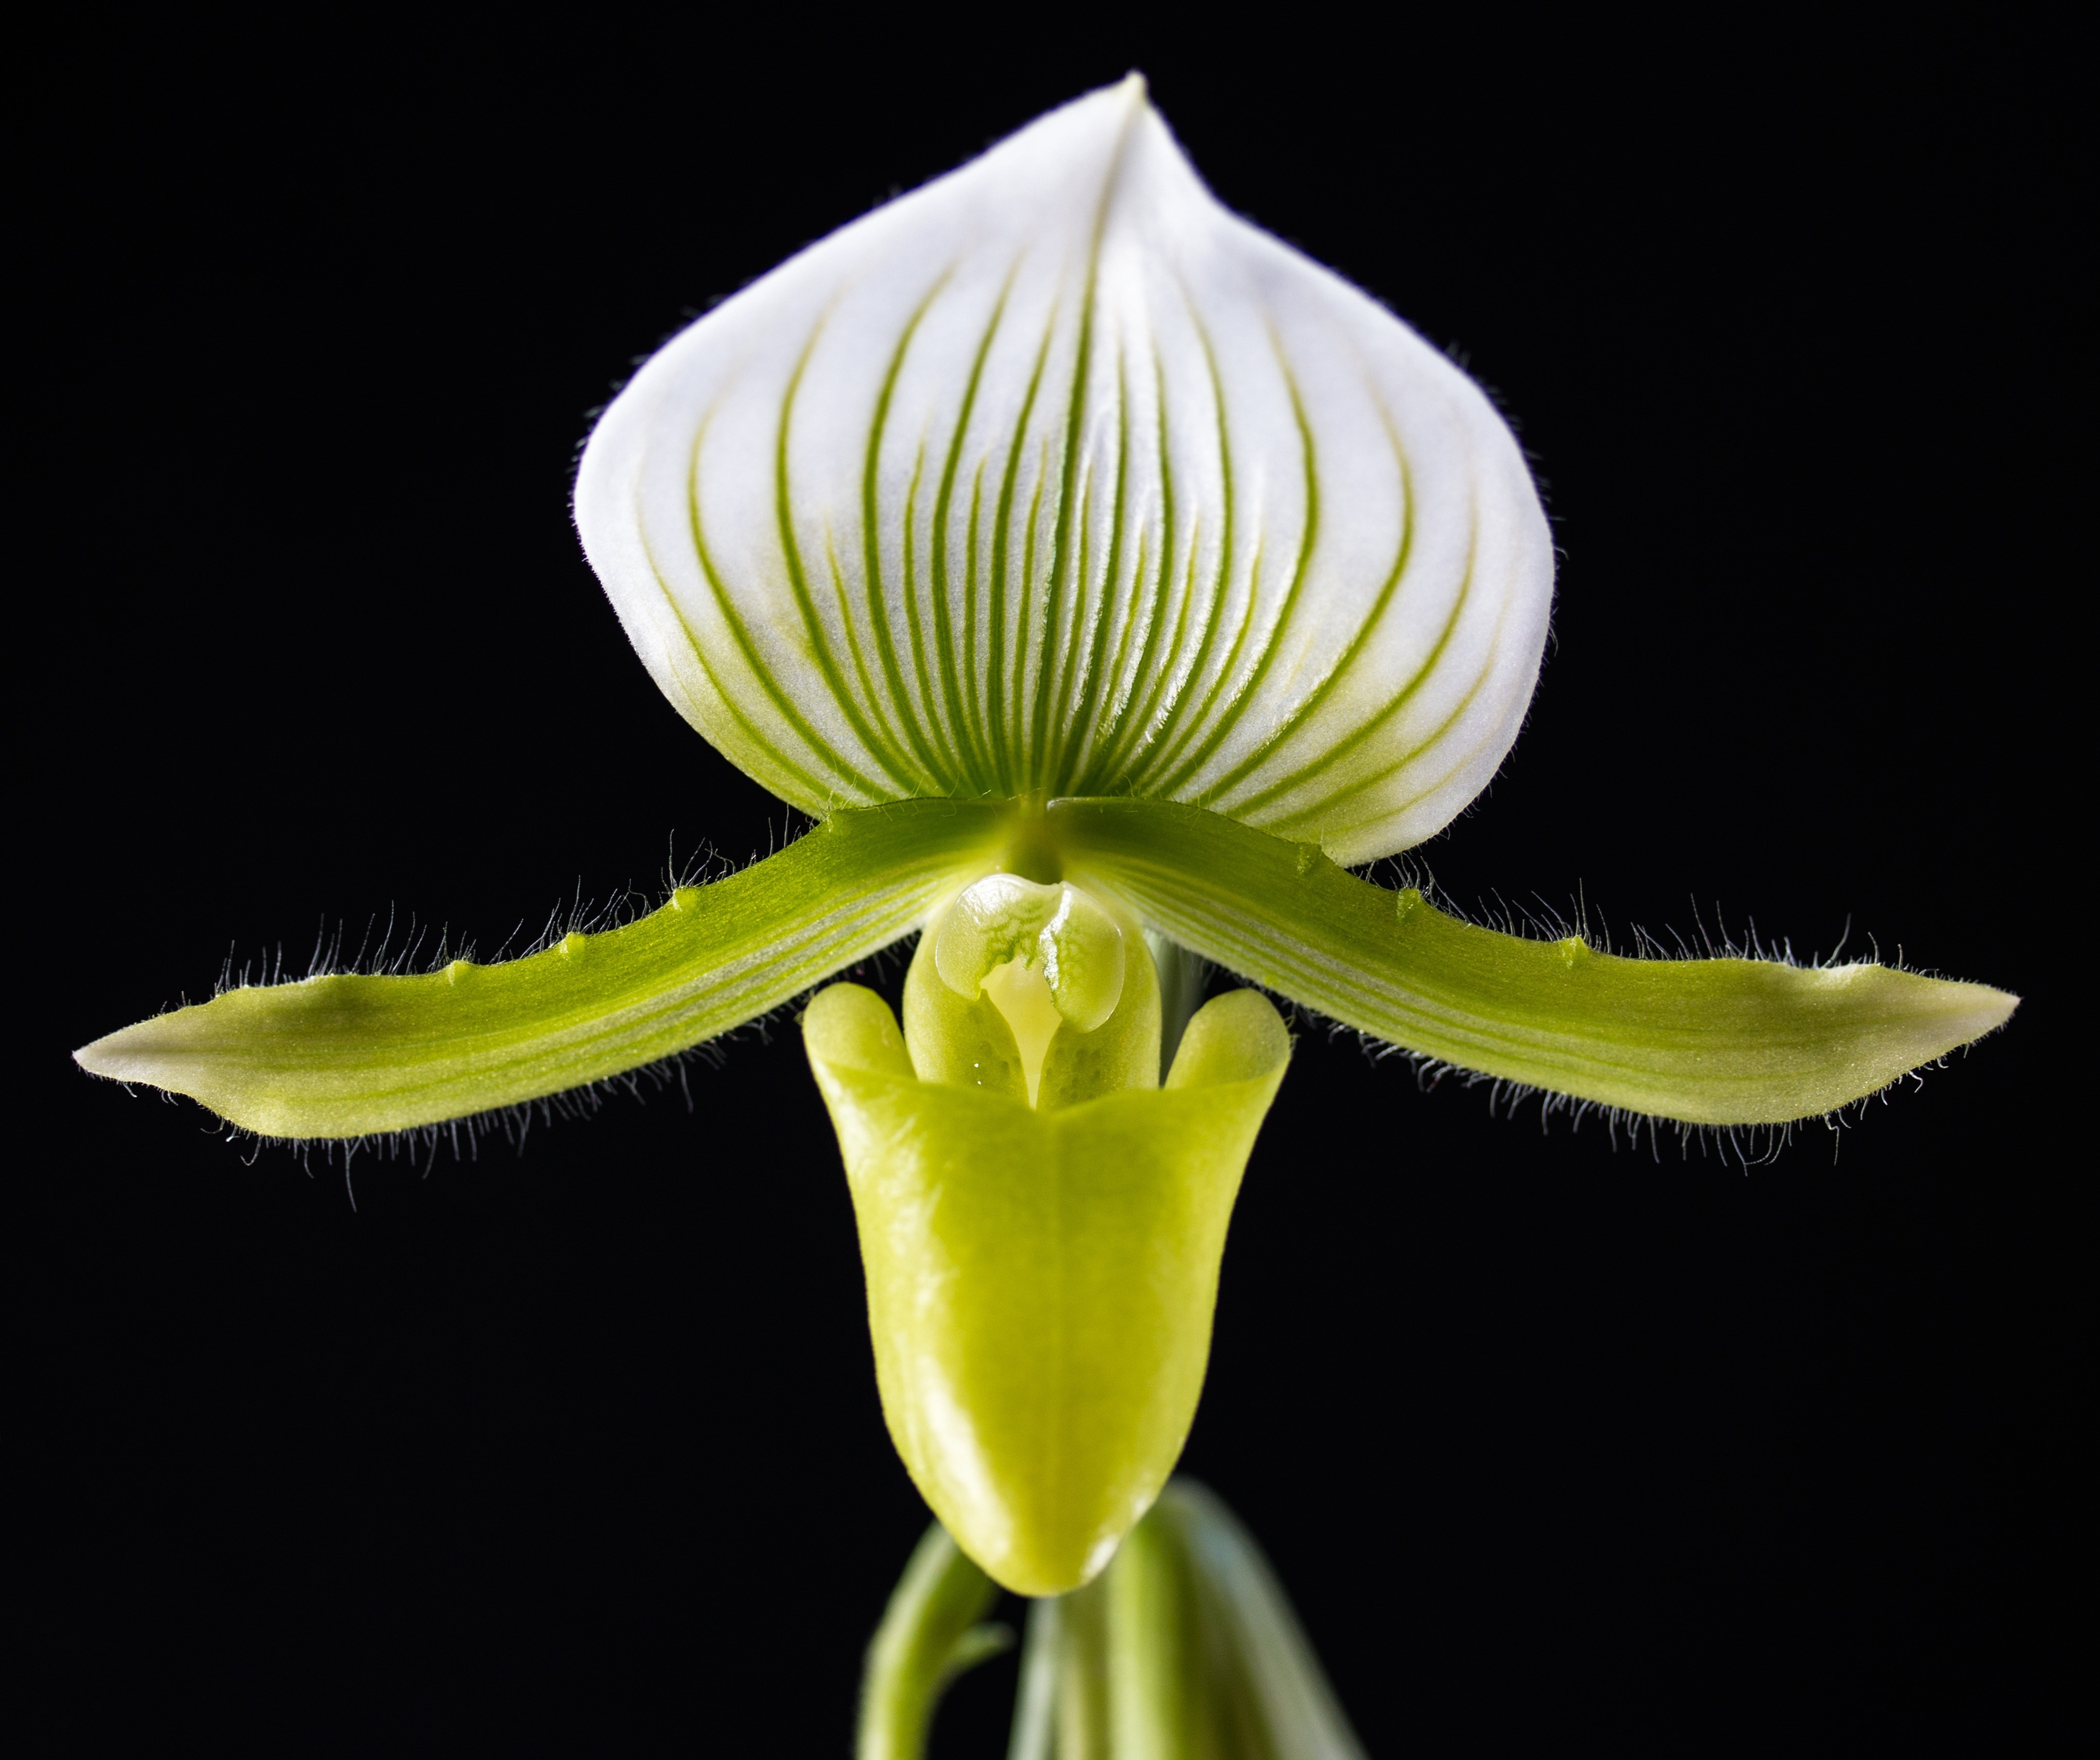 white and green lady's slipper orchid